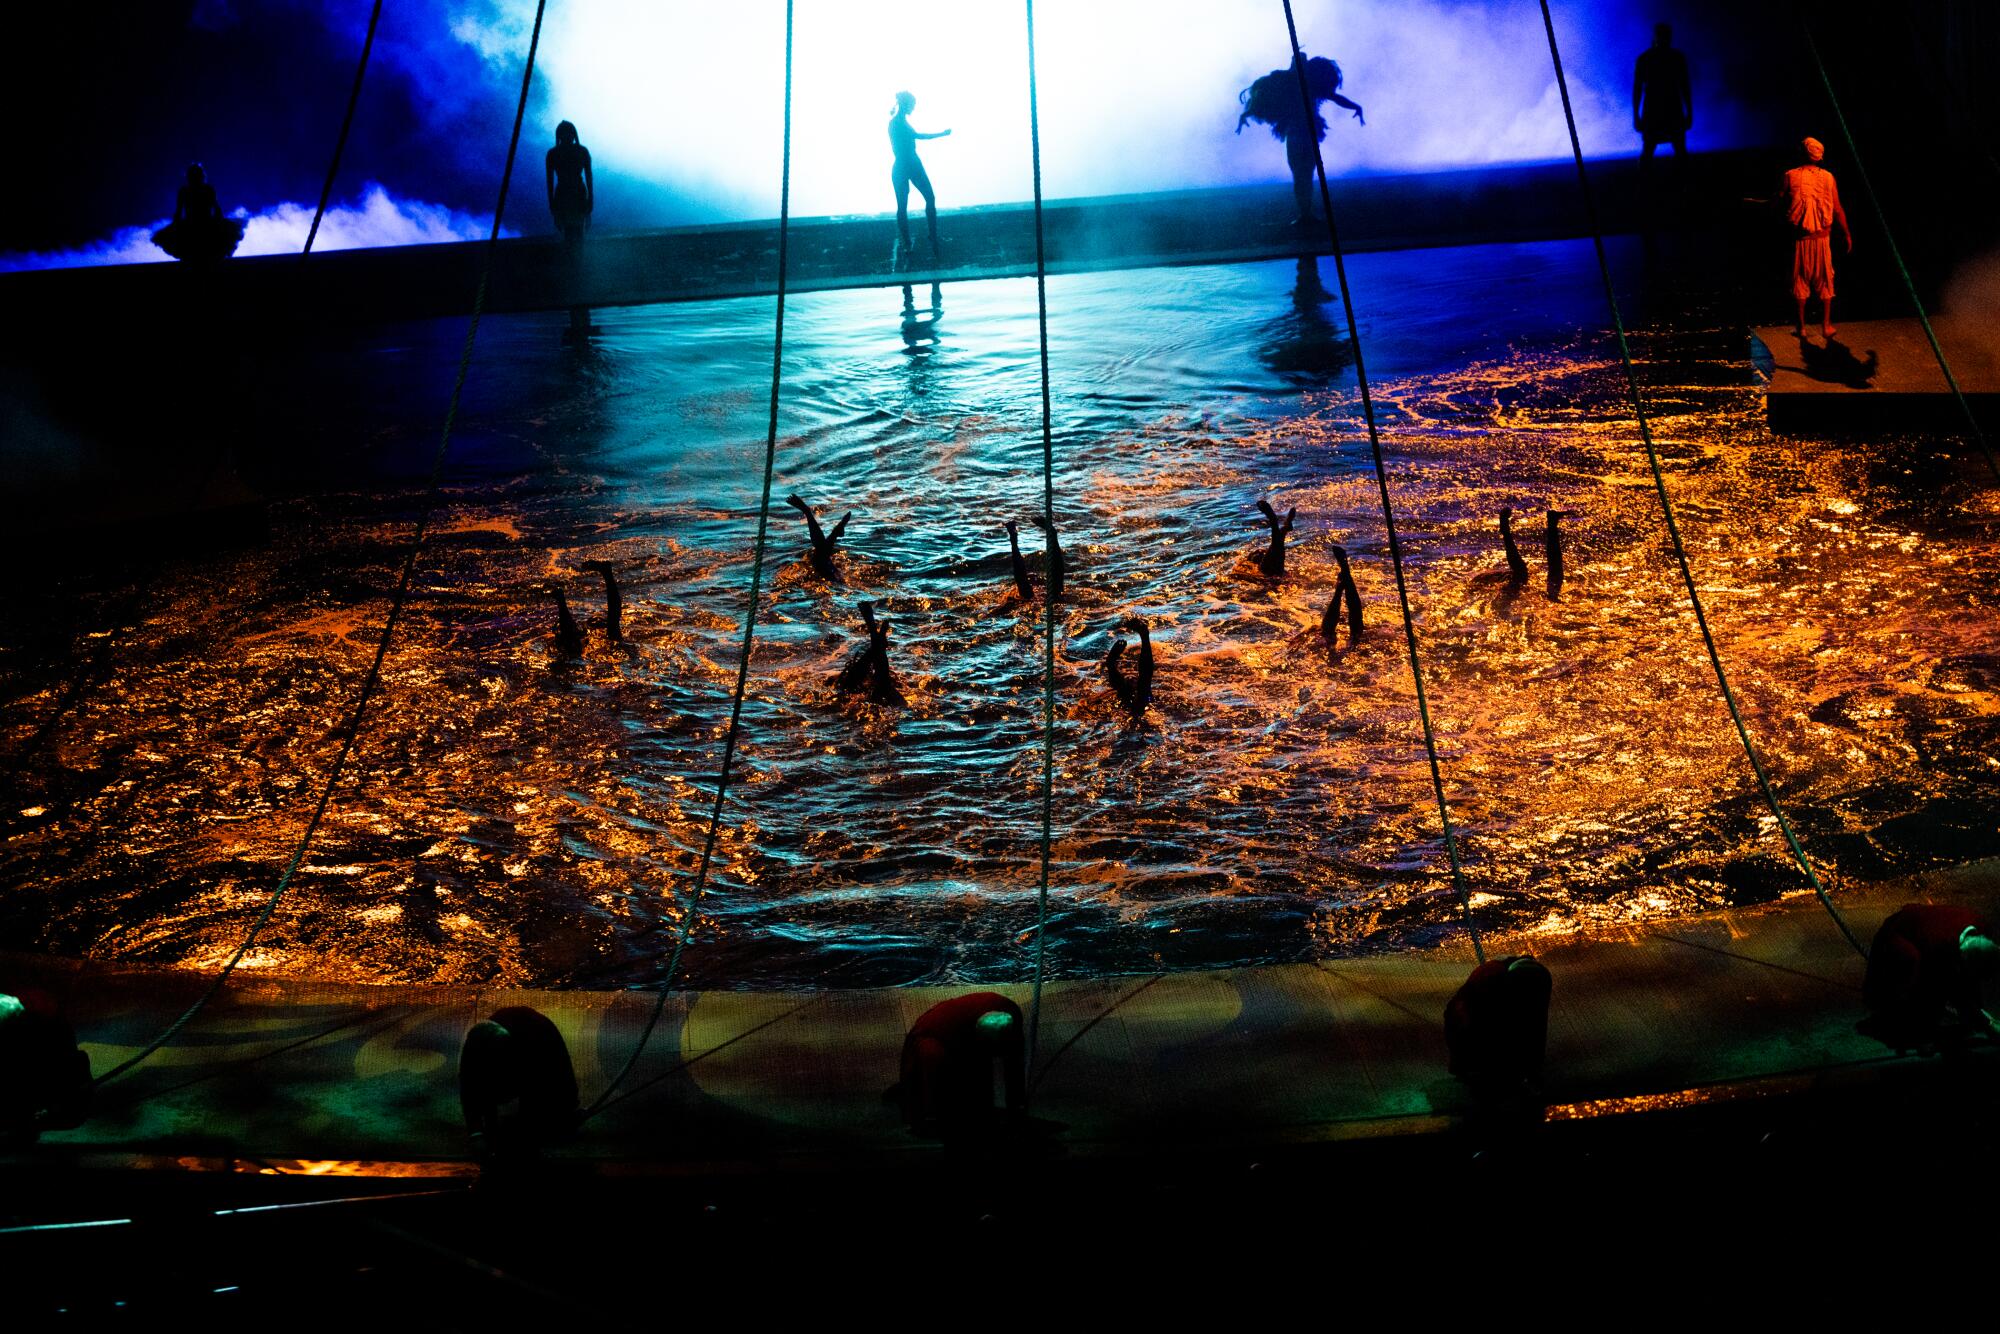 Synchronized swimmers perform in the water during Cirque du Soleil's "O."